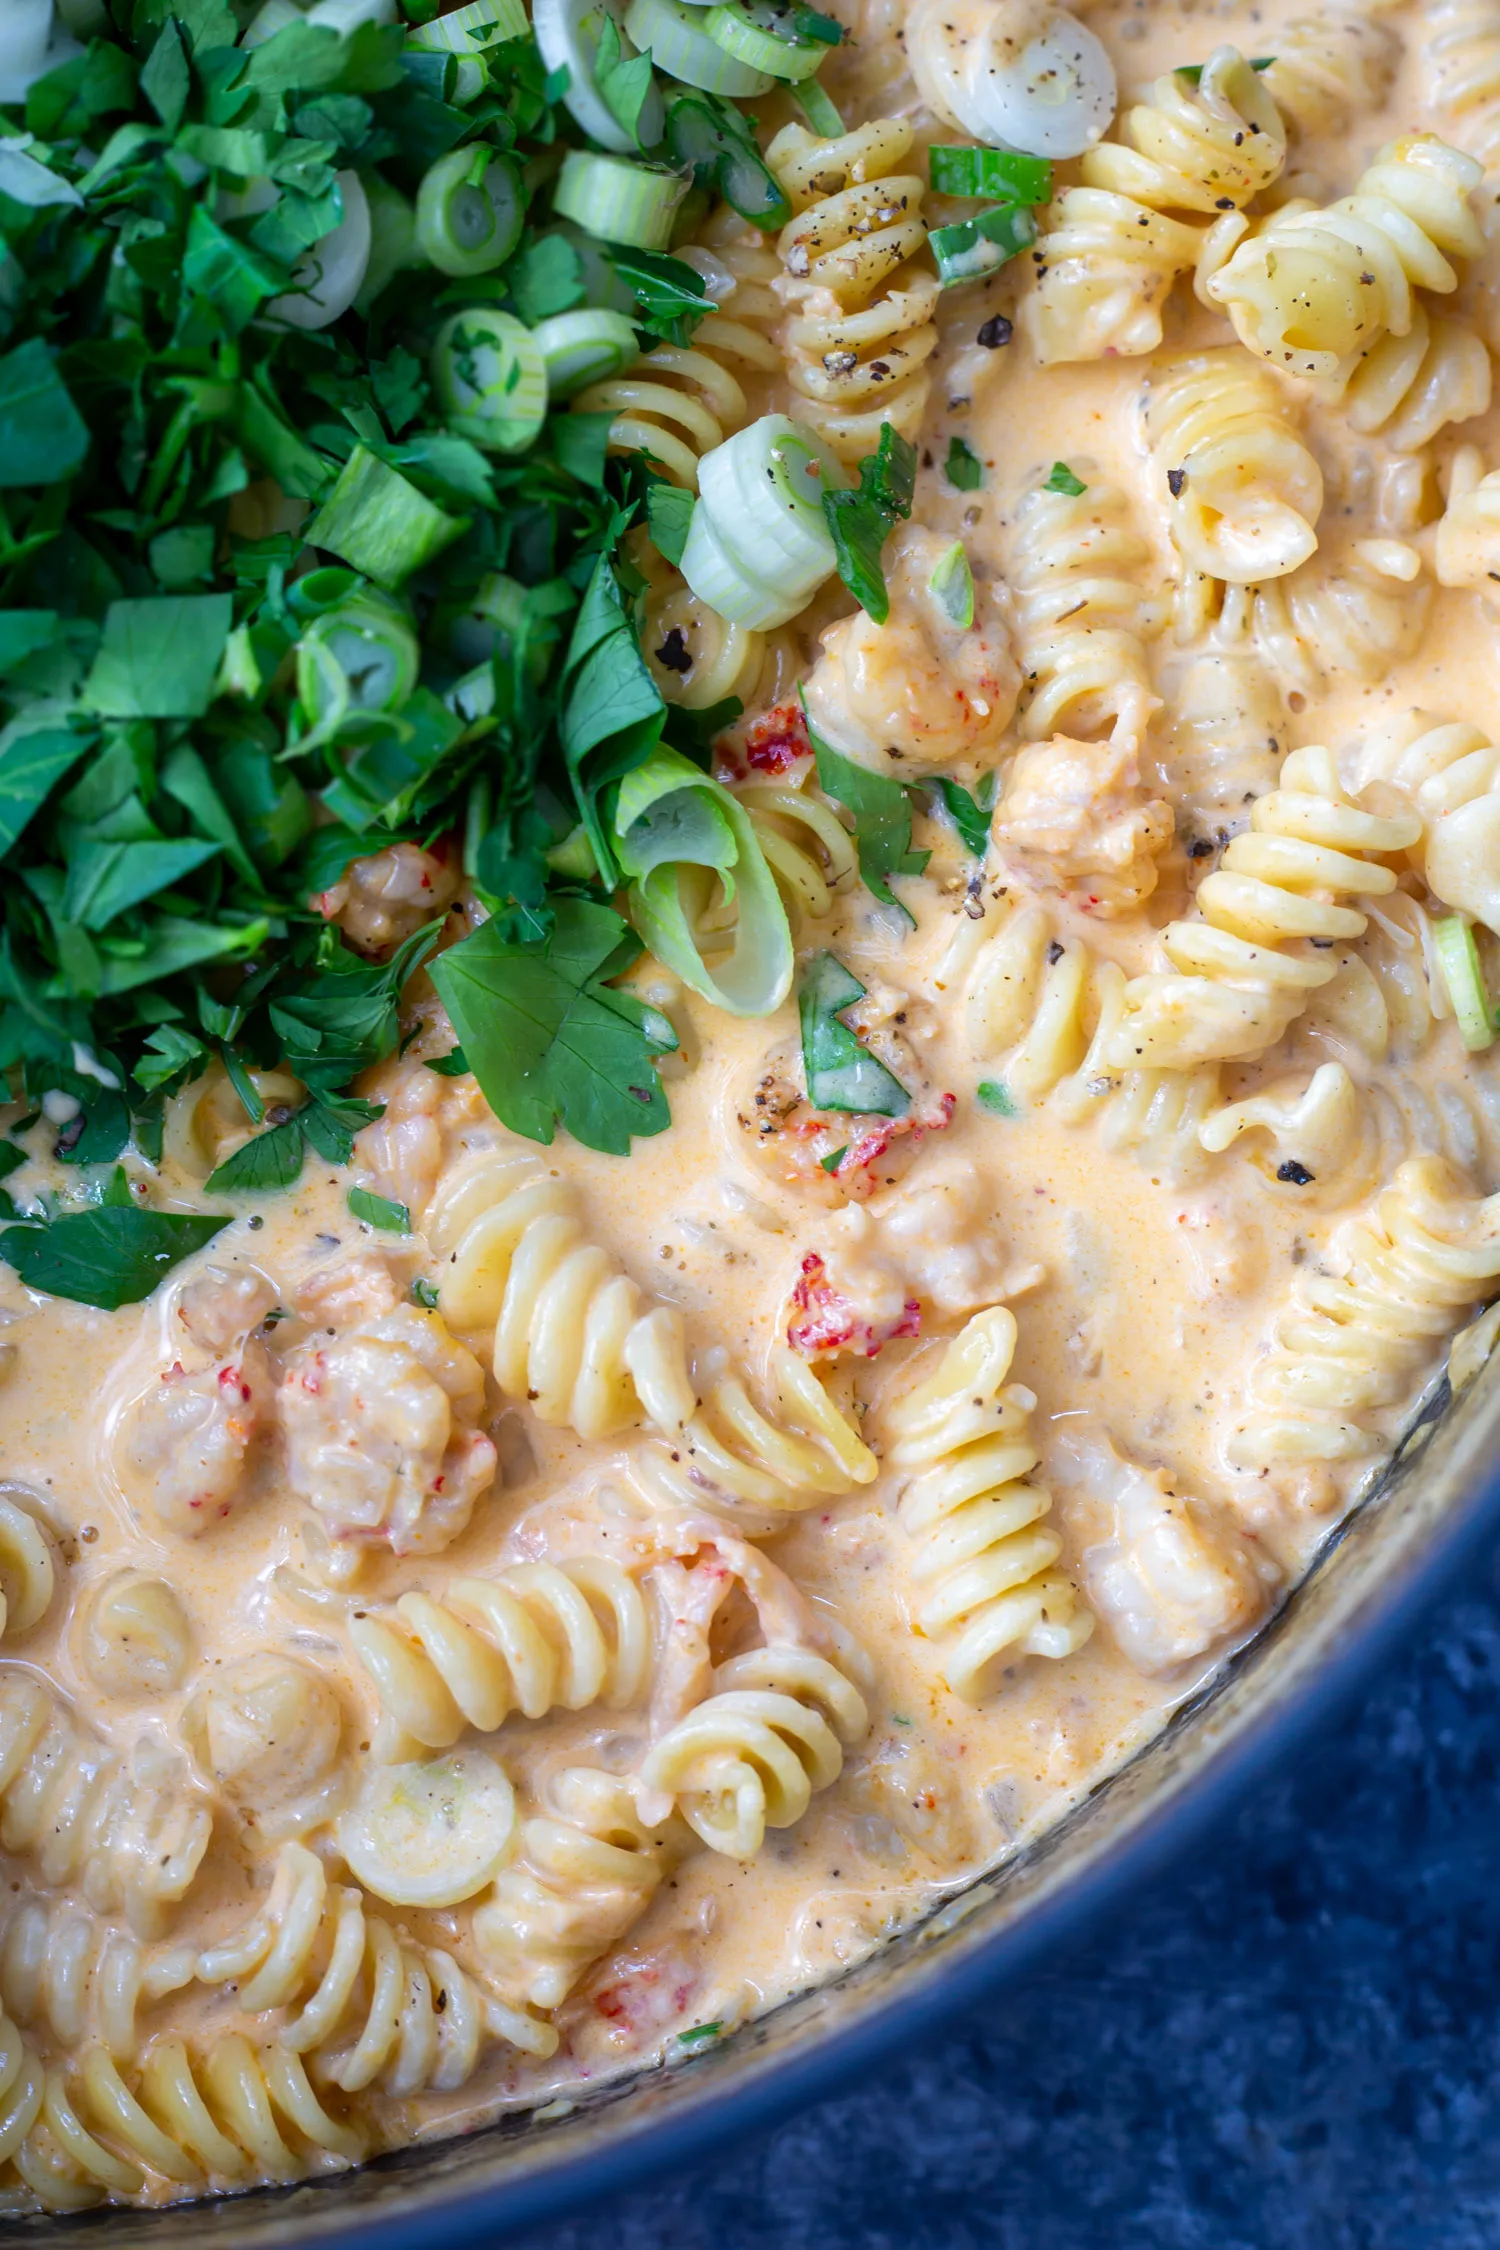 a close up of a pot full of creamy sauce, juicy crawfish tails, and rotini pasta.